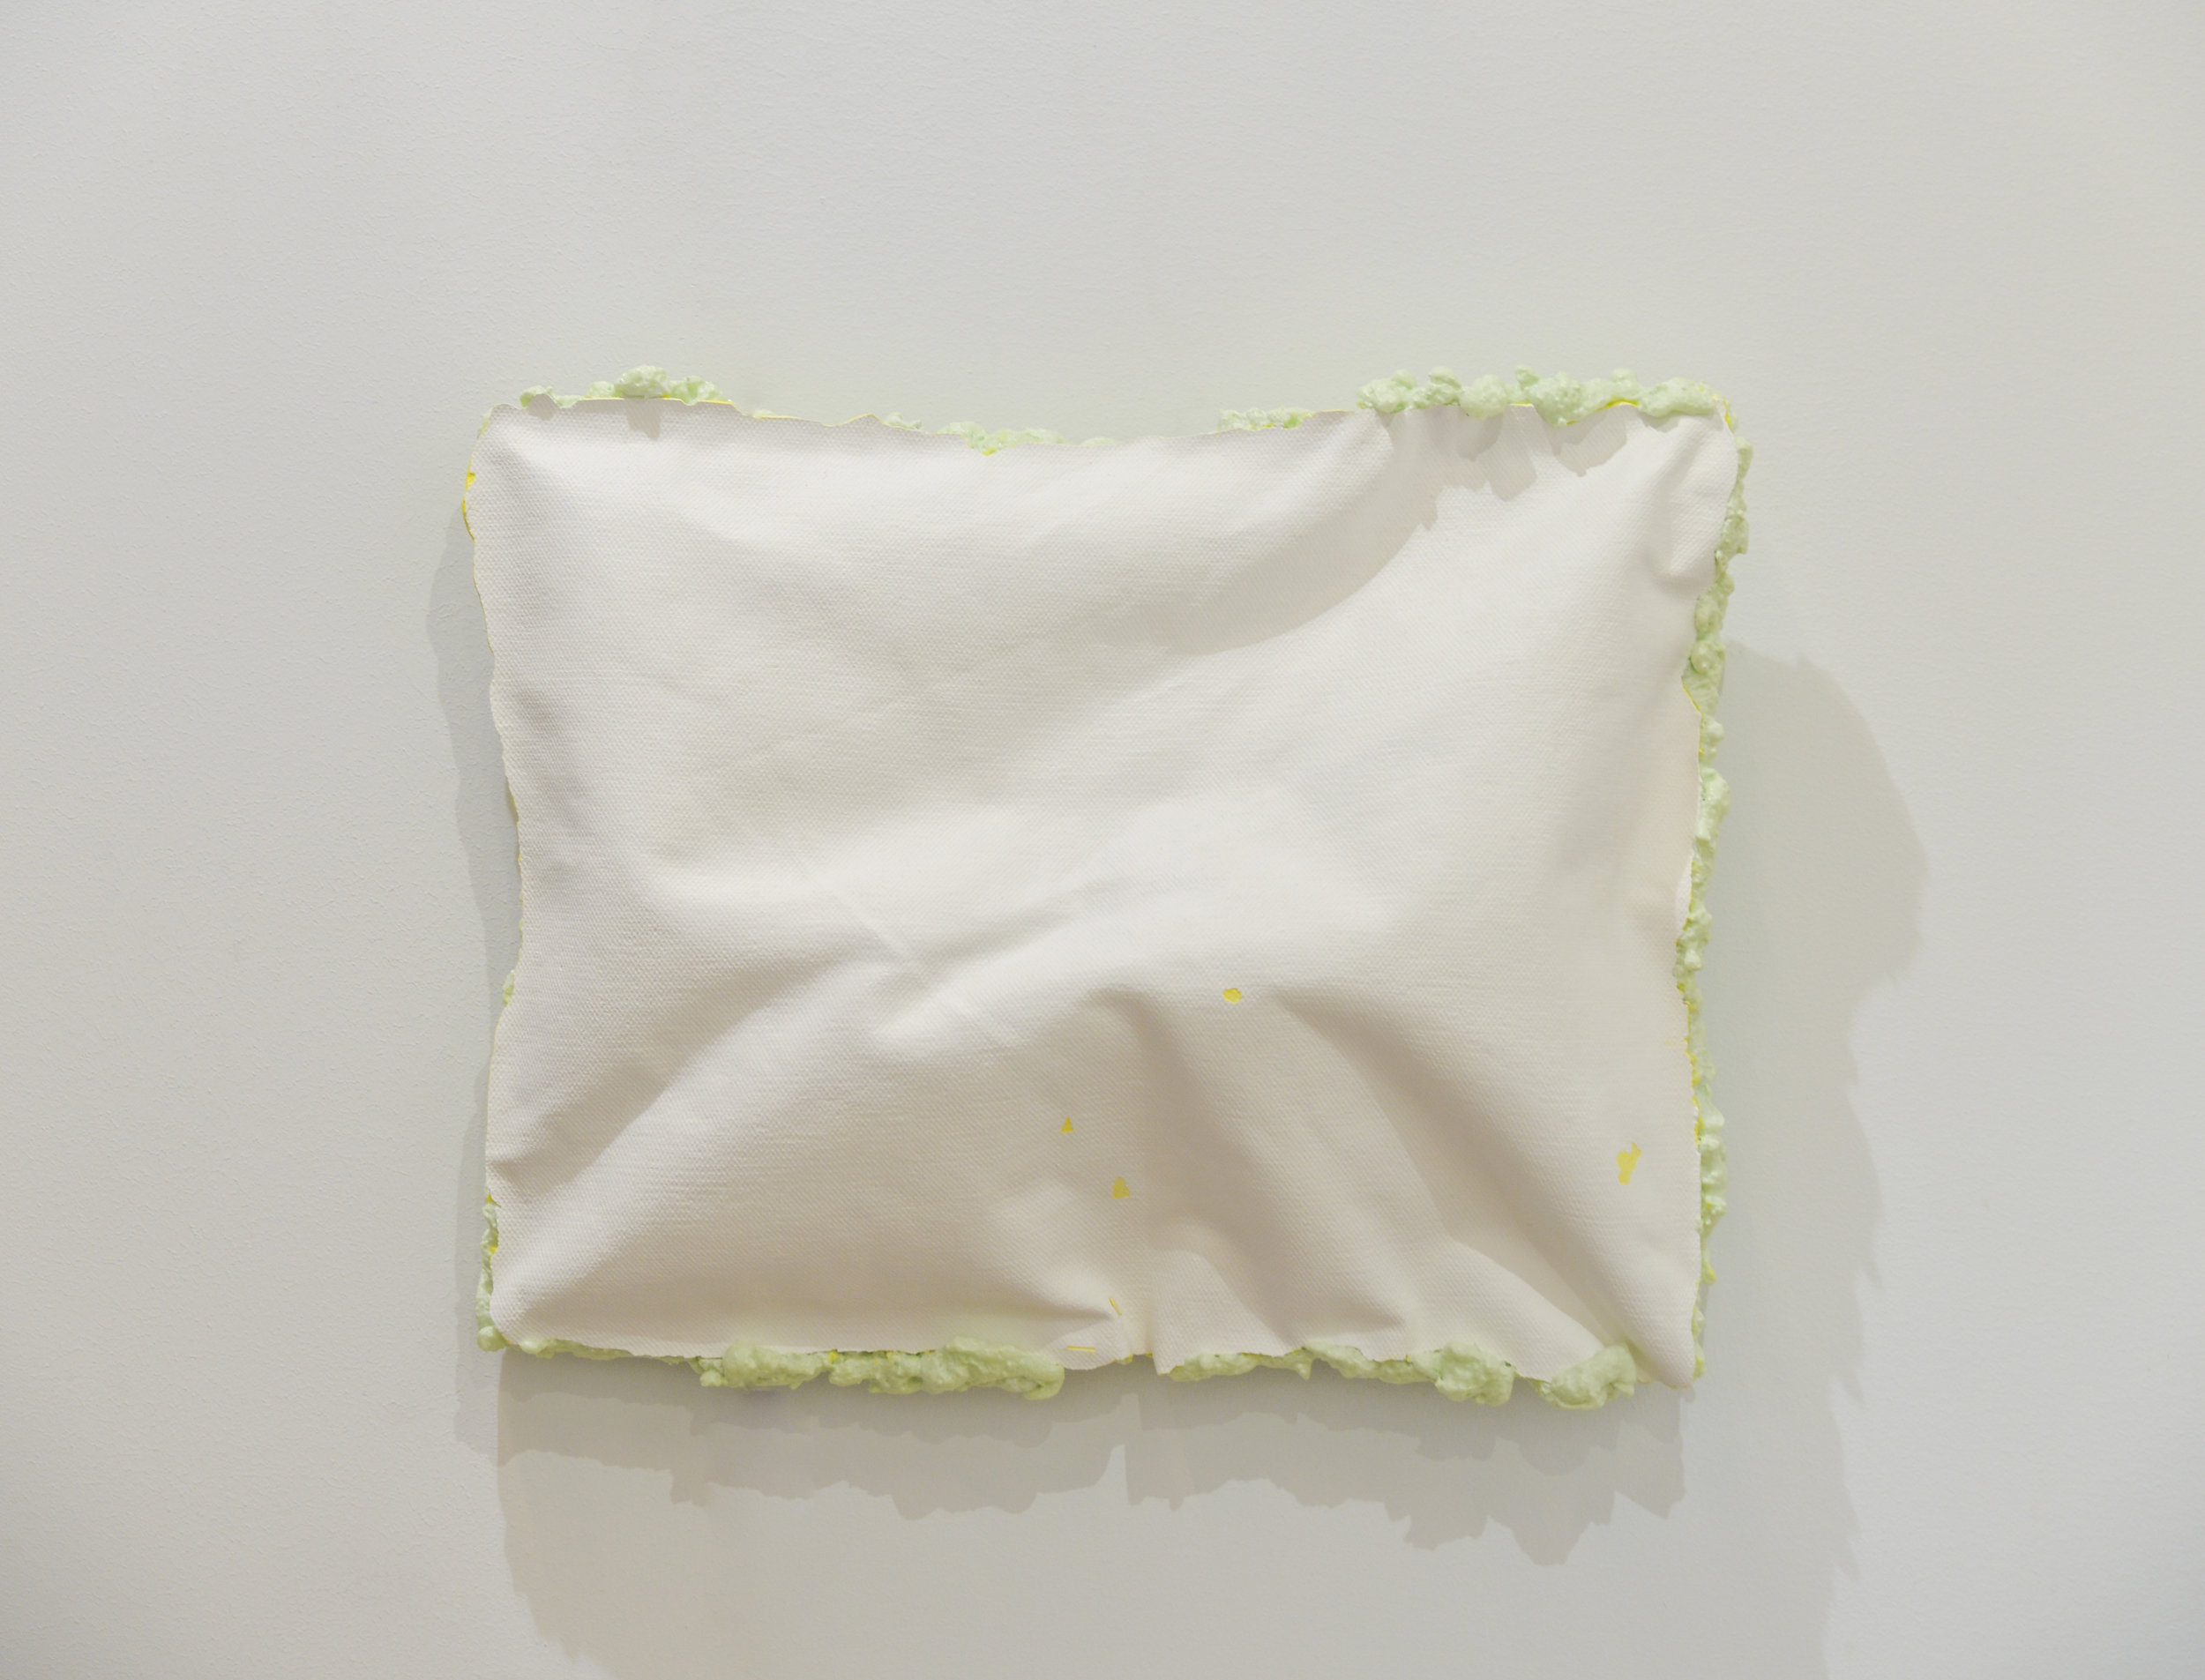 A show about the canvas(Caught)   Acrylic, plaster and foam, 40x 46cm, 2018.jpg.jpg